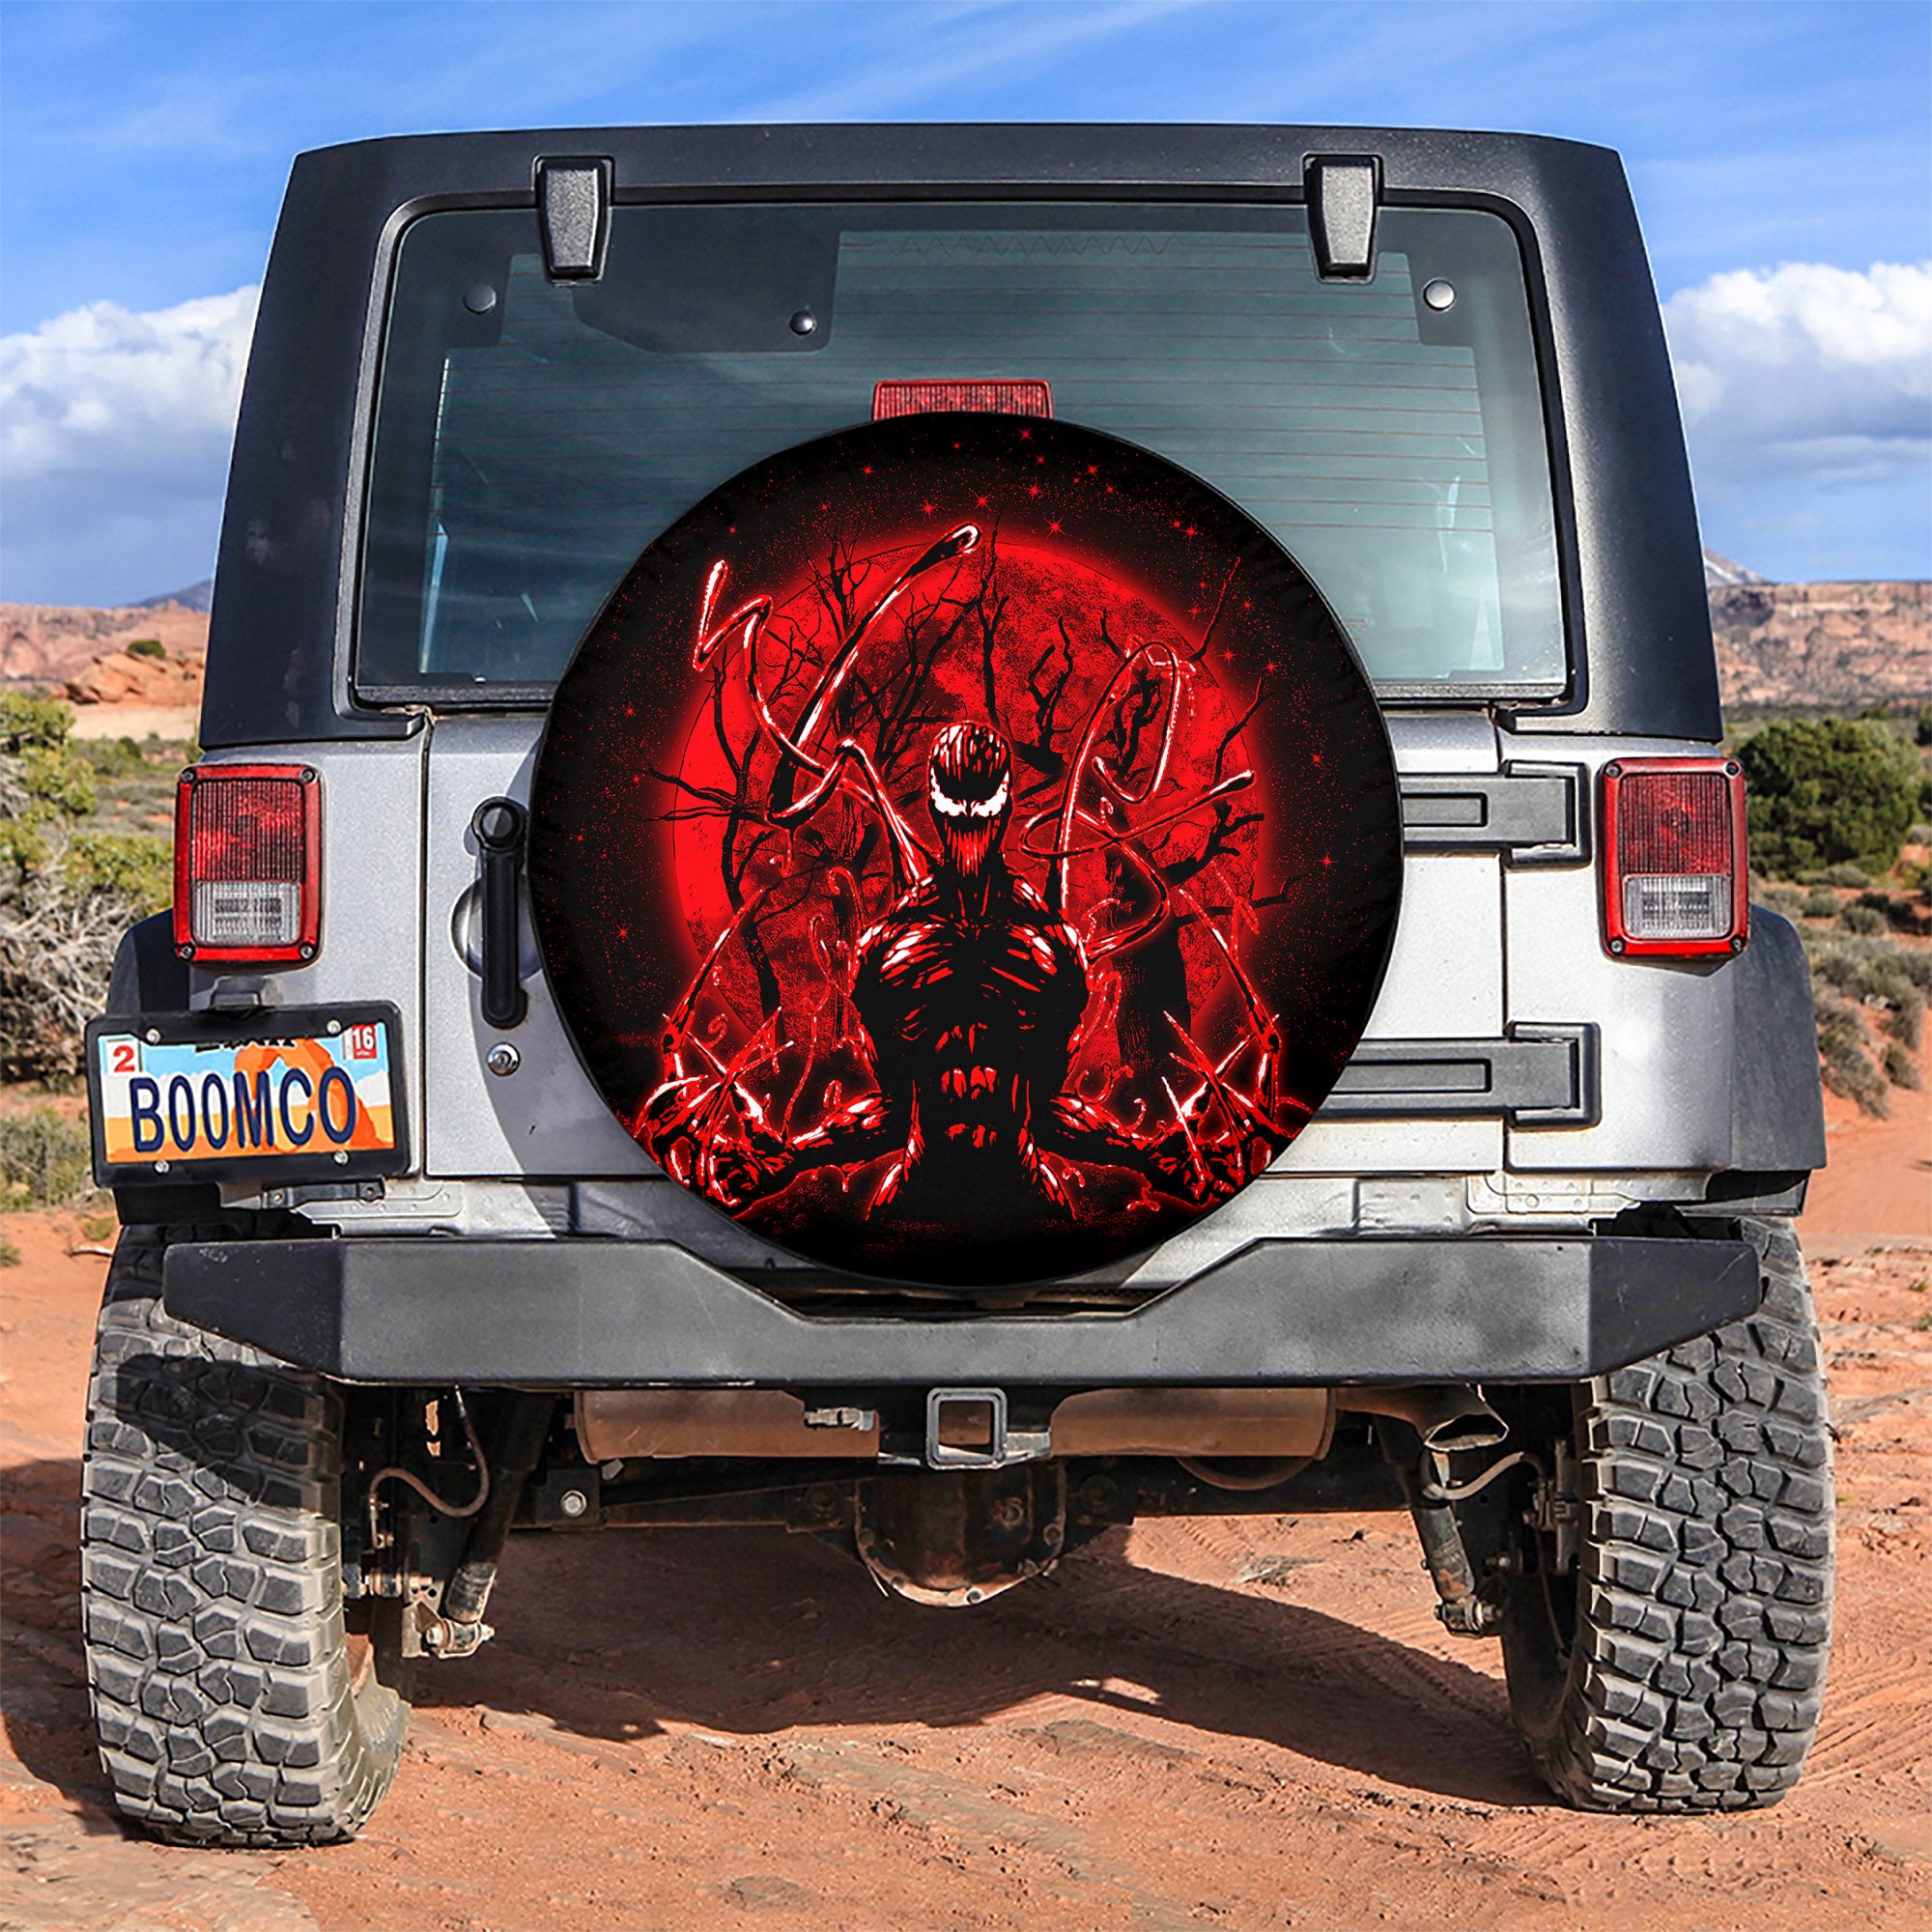 Carnage Moonlight Spare Tire Cover Gift For Campers Nearkii